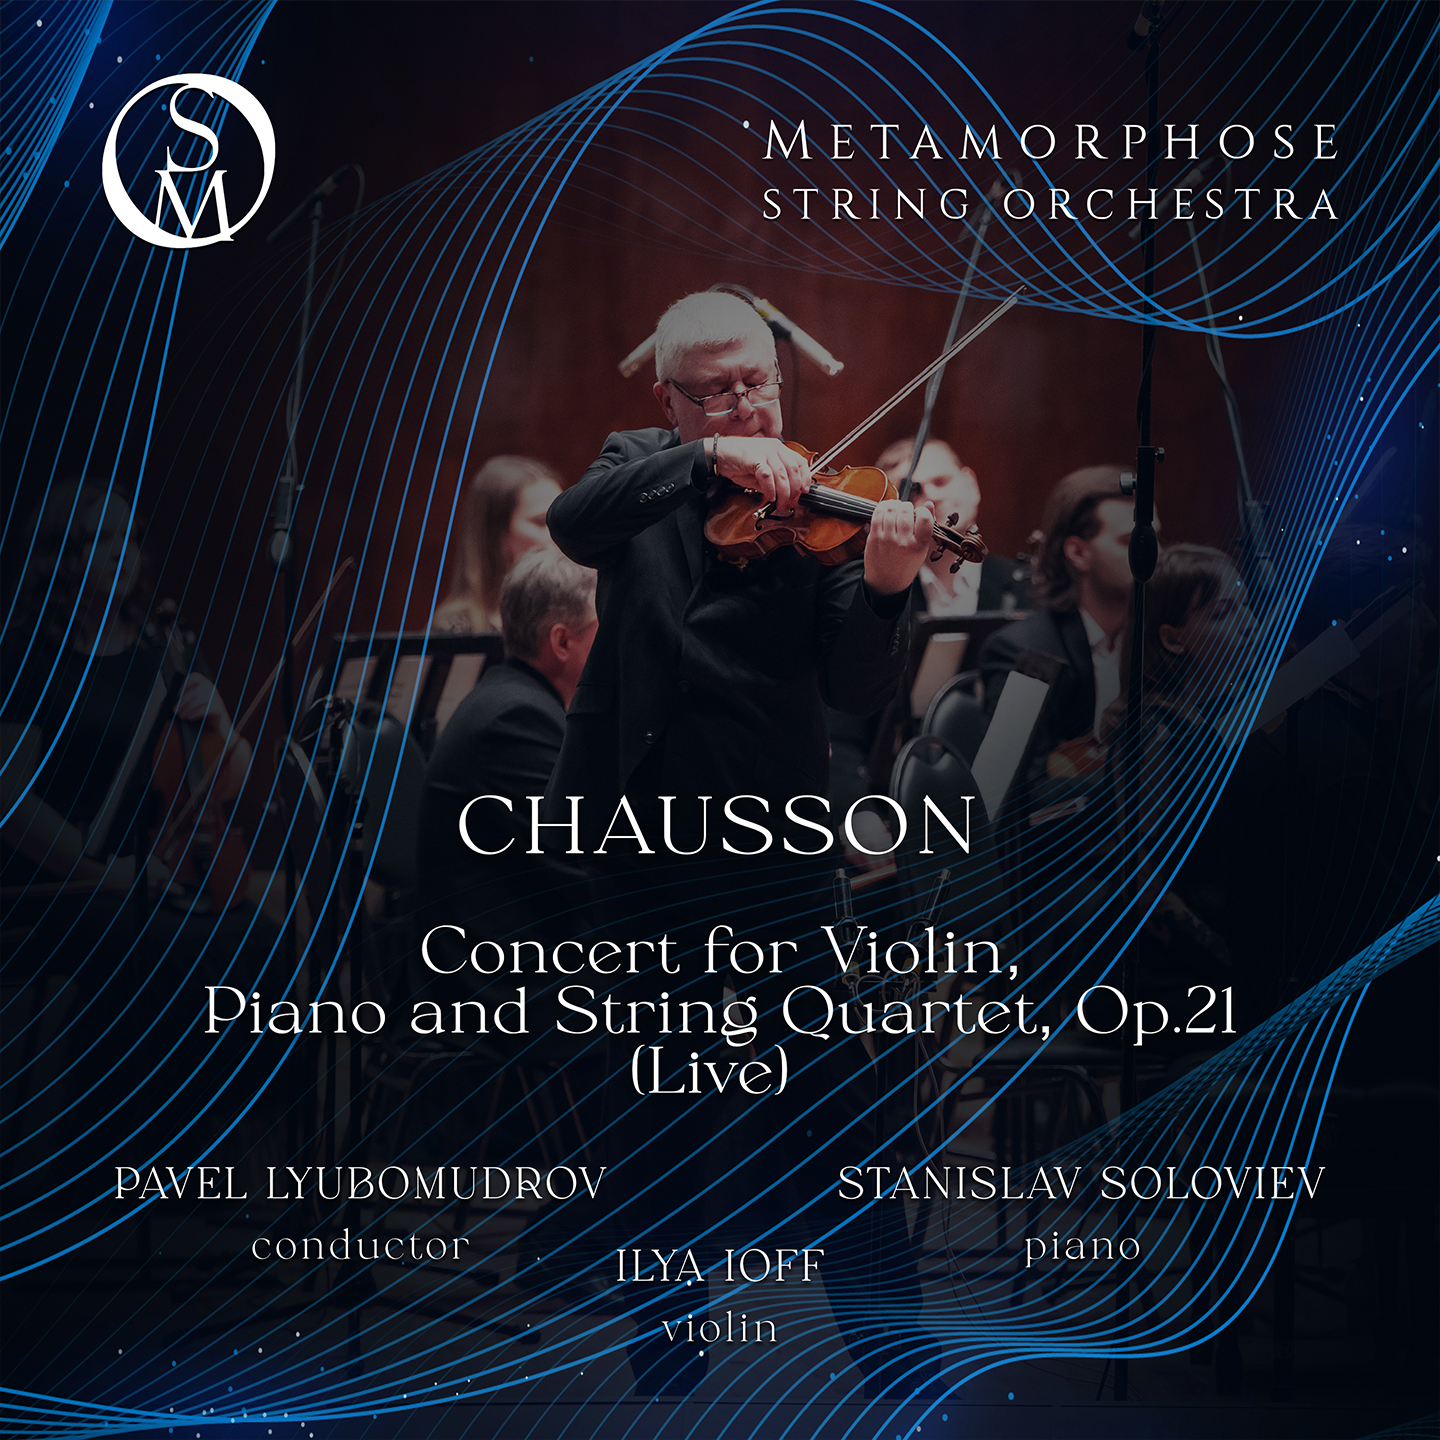 Chausson: Concerto for Piano, Violin and String Quartet in D major, Op. 21 (Live)